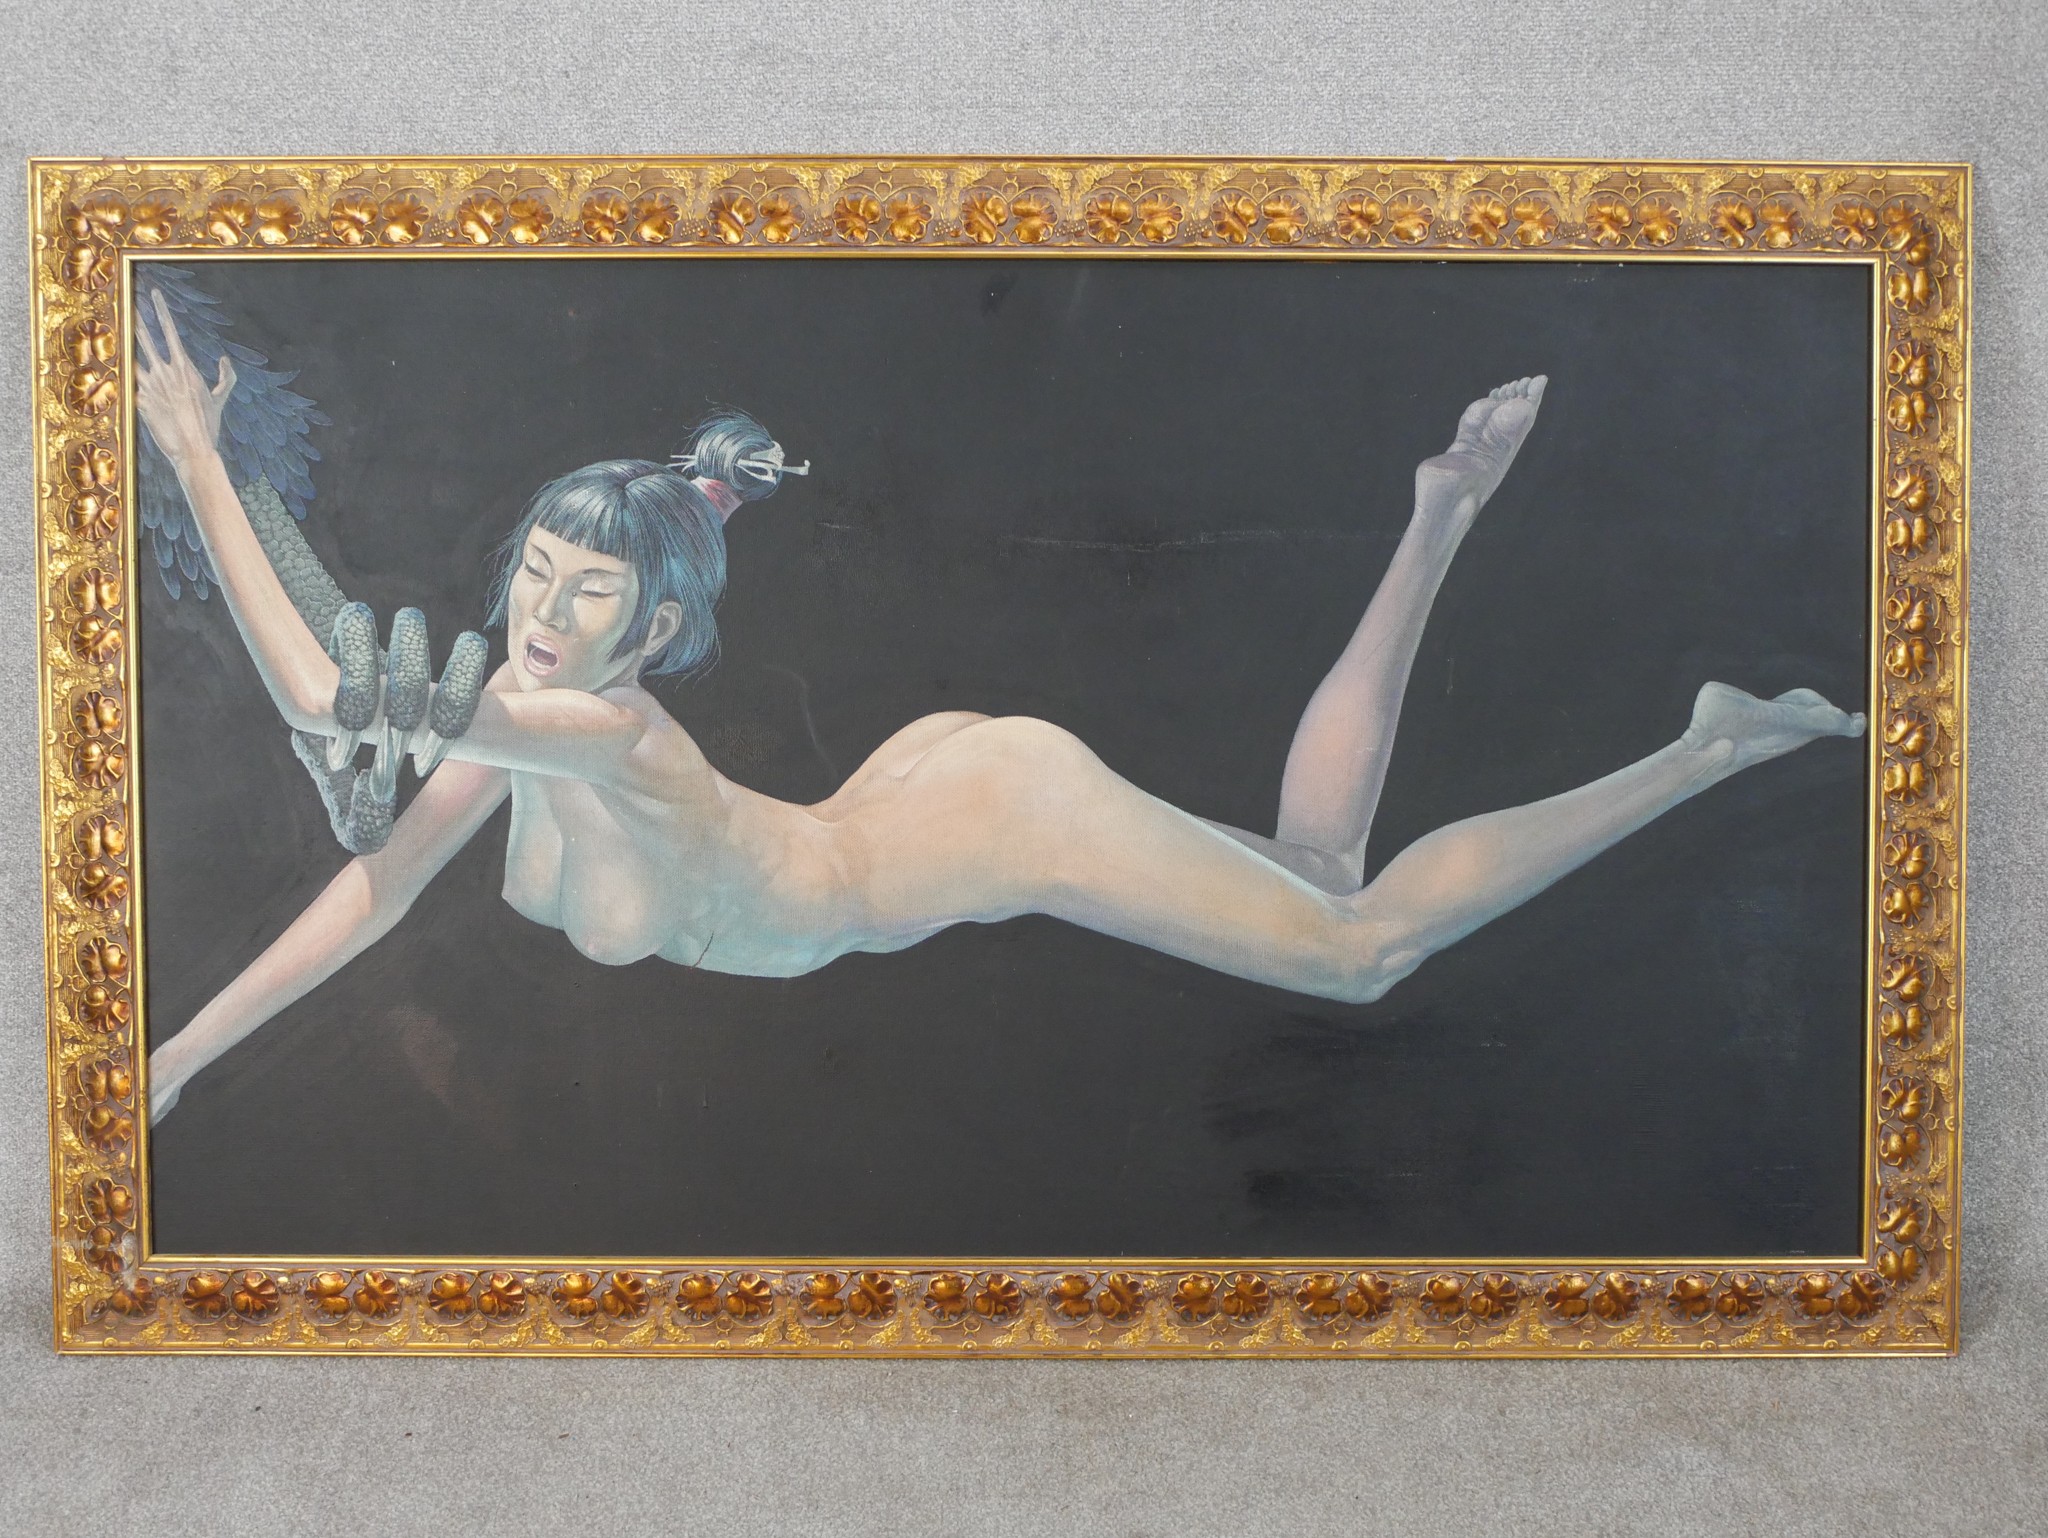 20th century, Thai inspired nude female, with serpent crawling on her arm, oil on canvas, signed and - Image 2 of 7